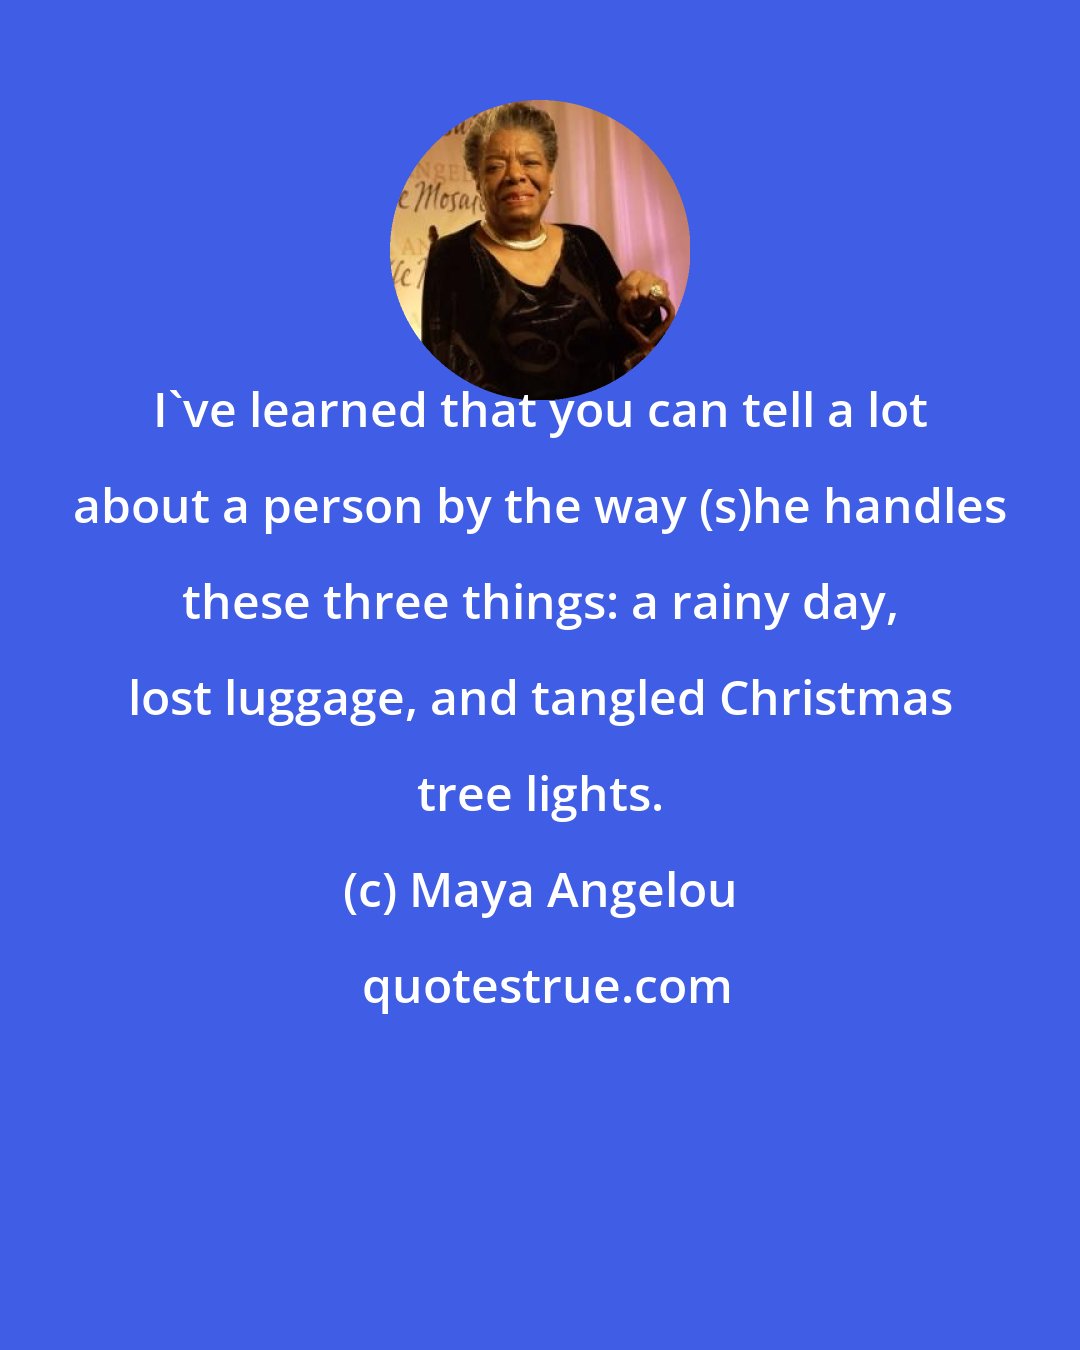 Maya Angelou: I've learned that you can tell a lot about a person by the way (s)he handles these three things: a rainy day, lost luggage, and tangled Christmas tree lights.